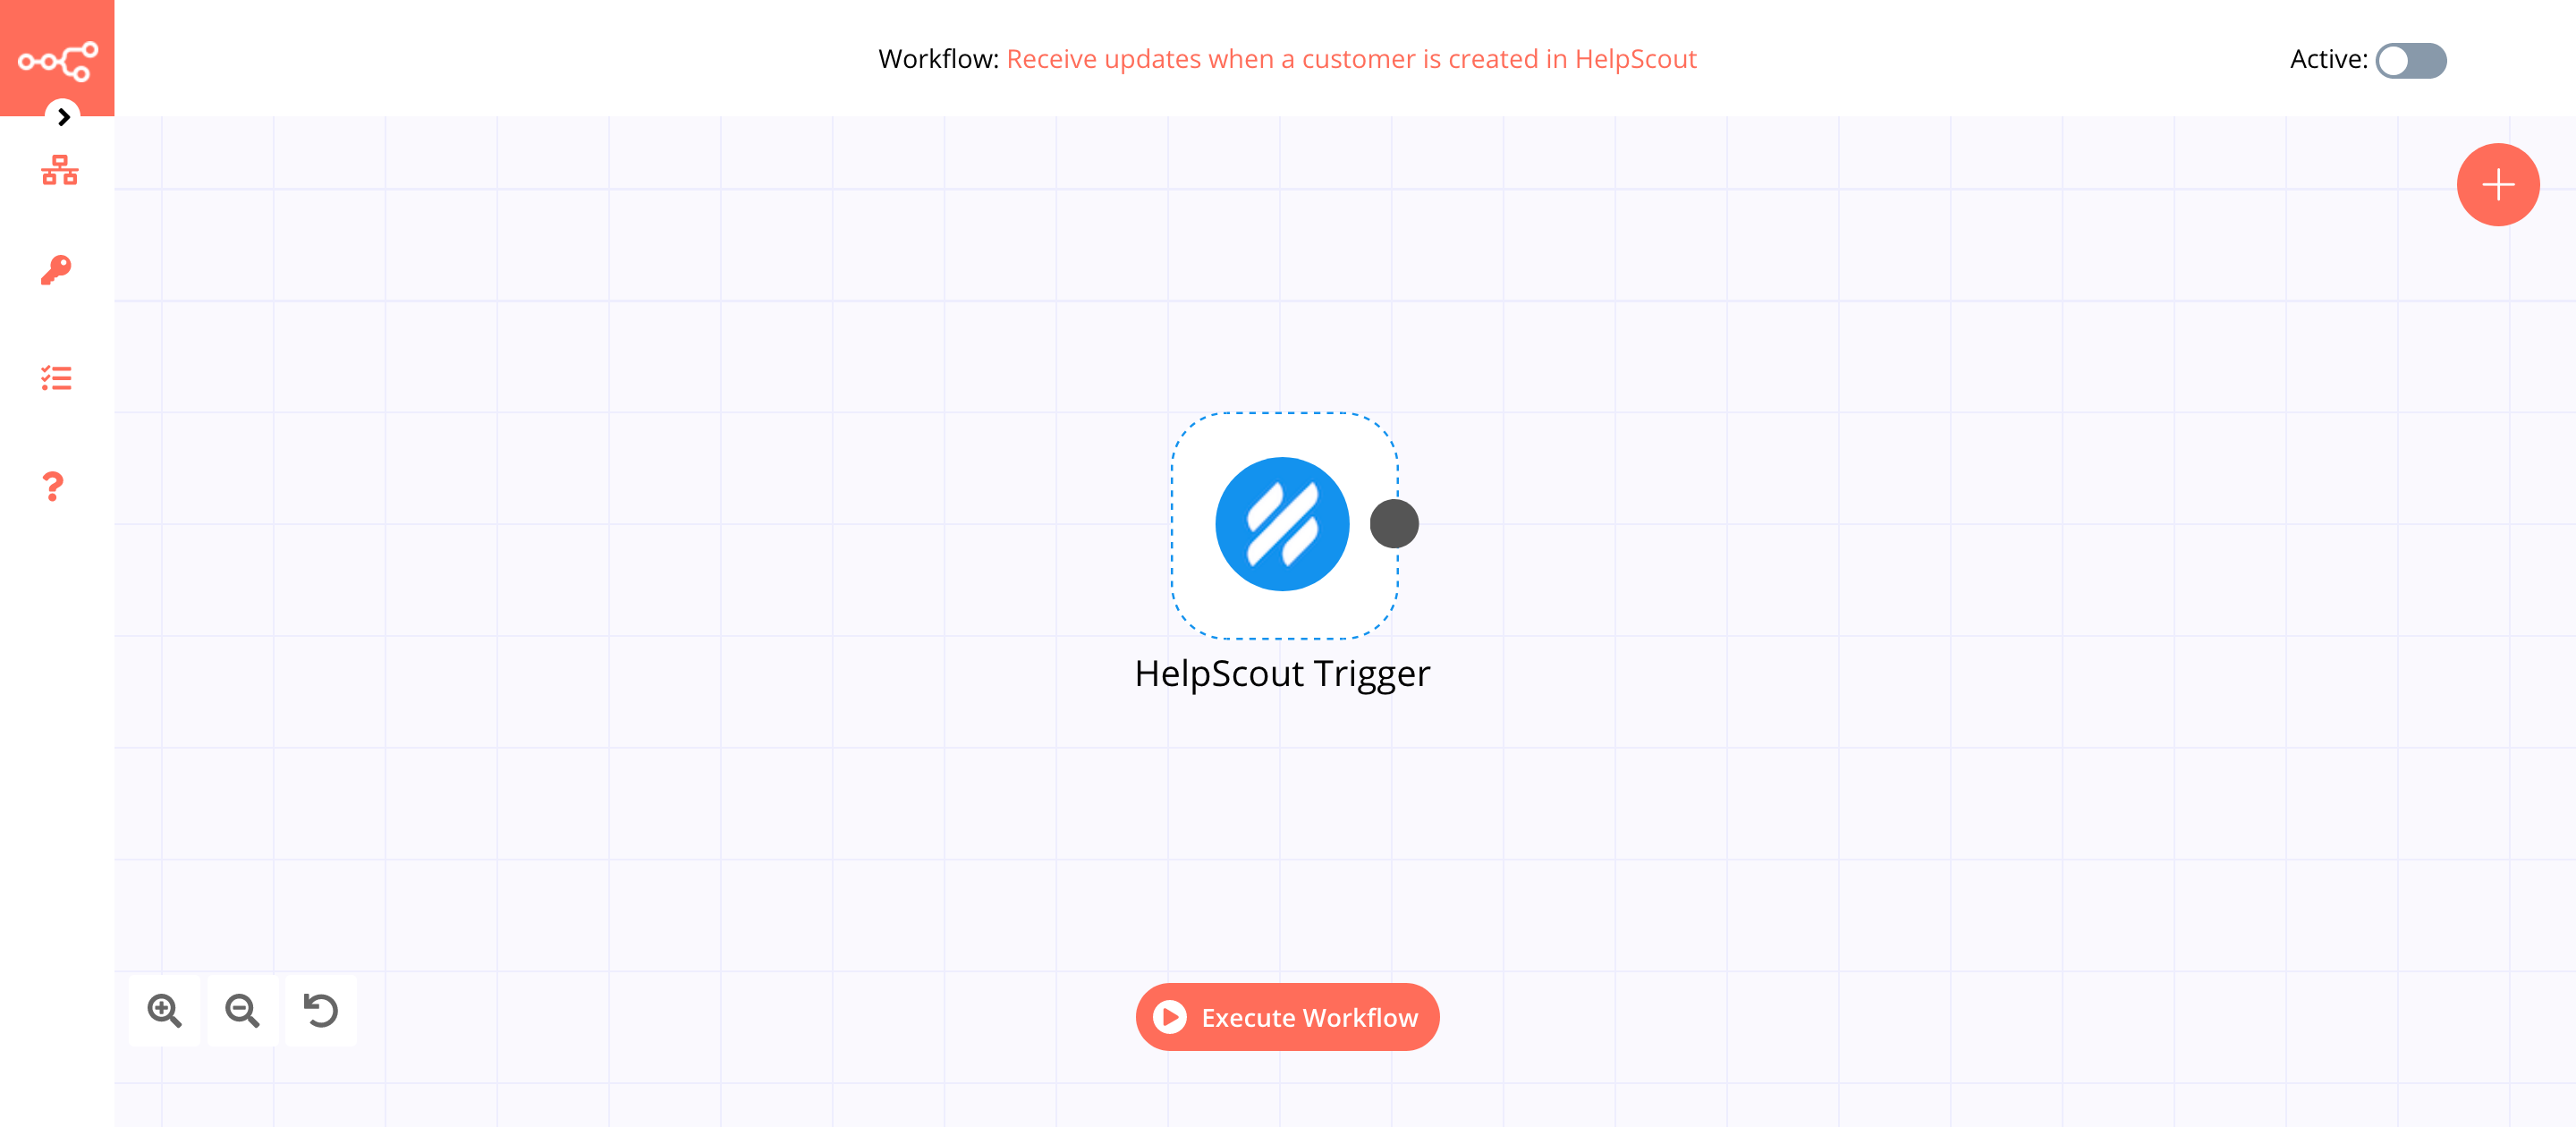 A workflow with the Help Scout Trigger node